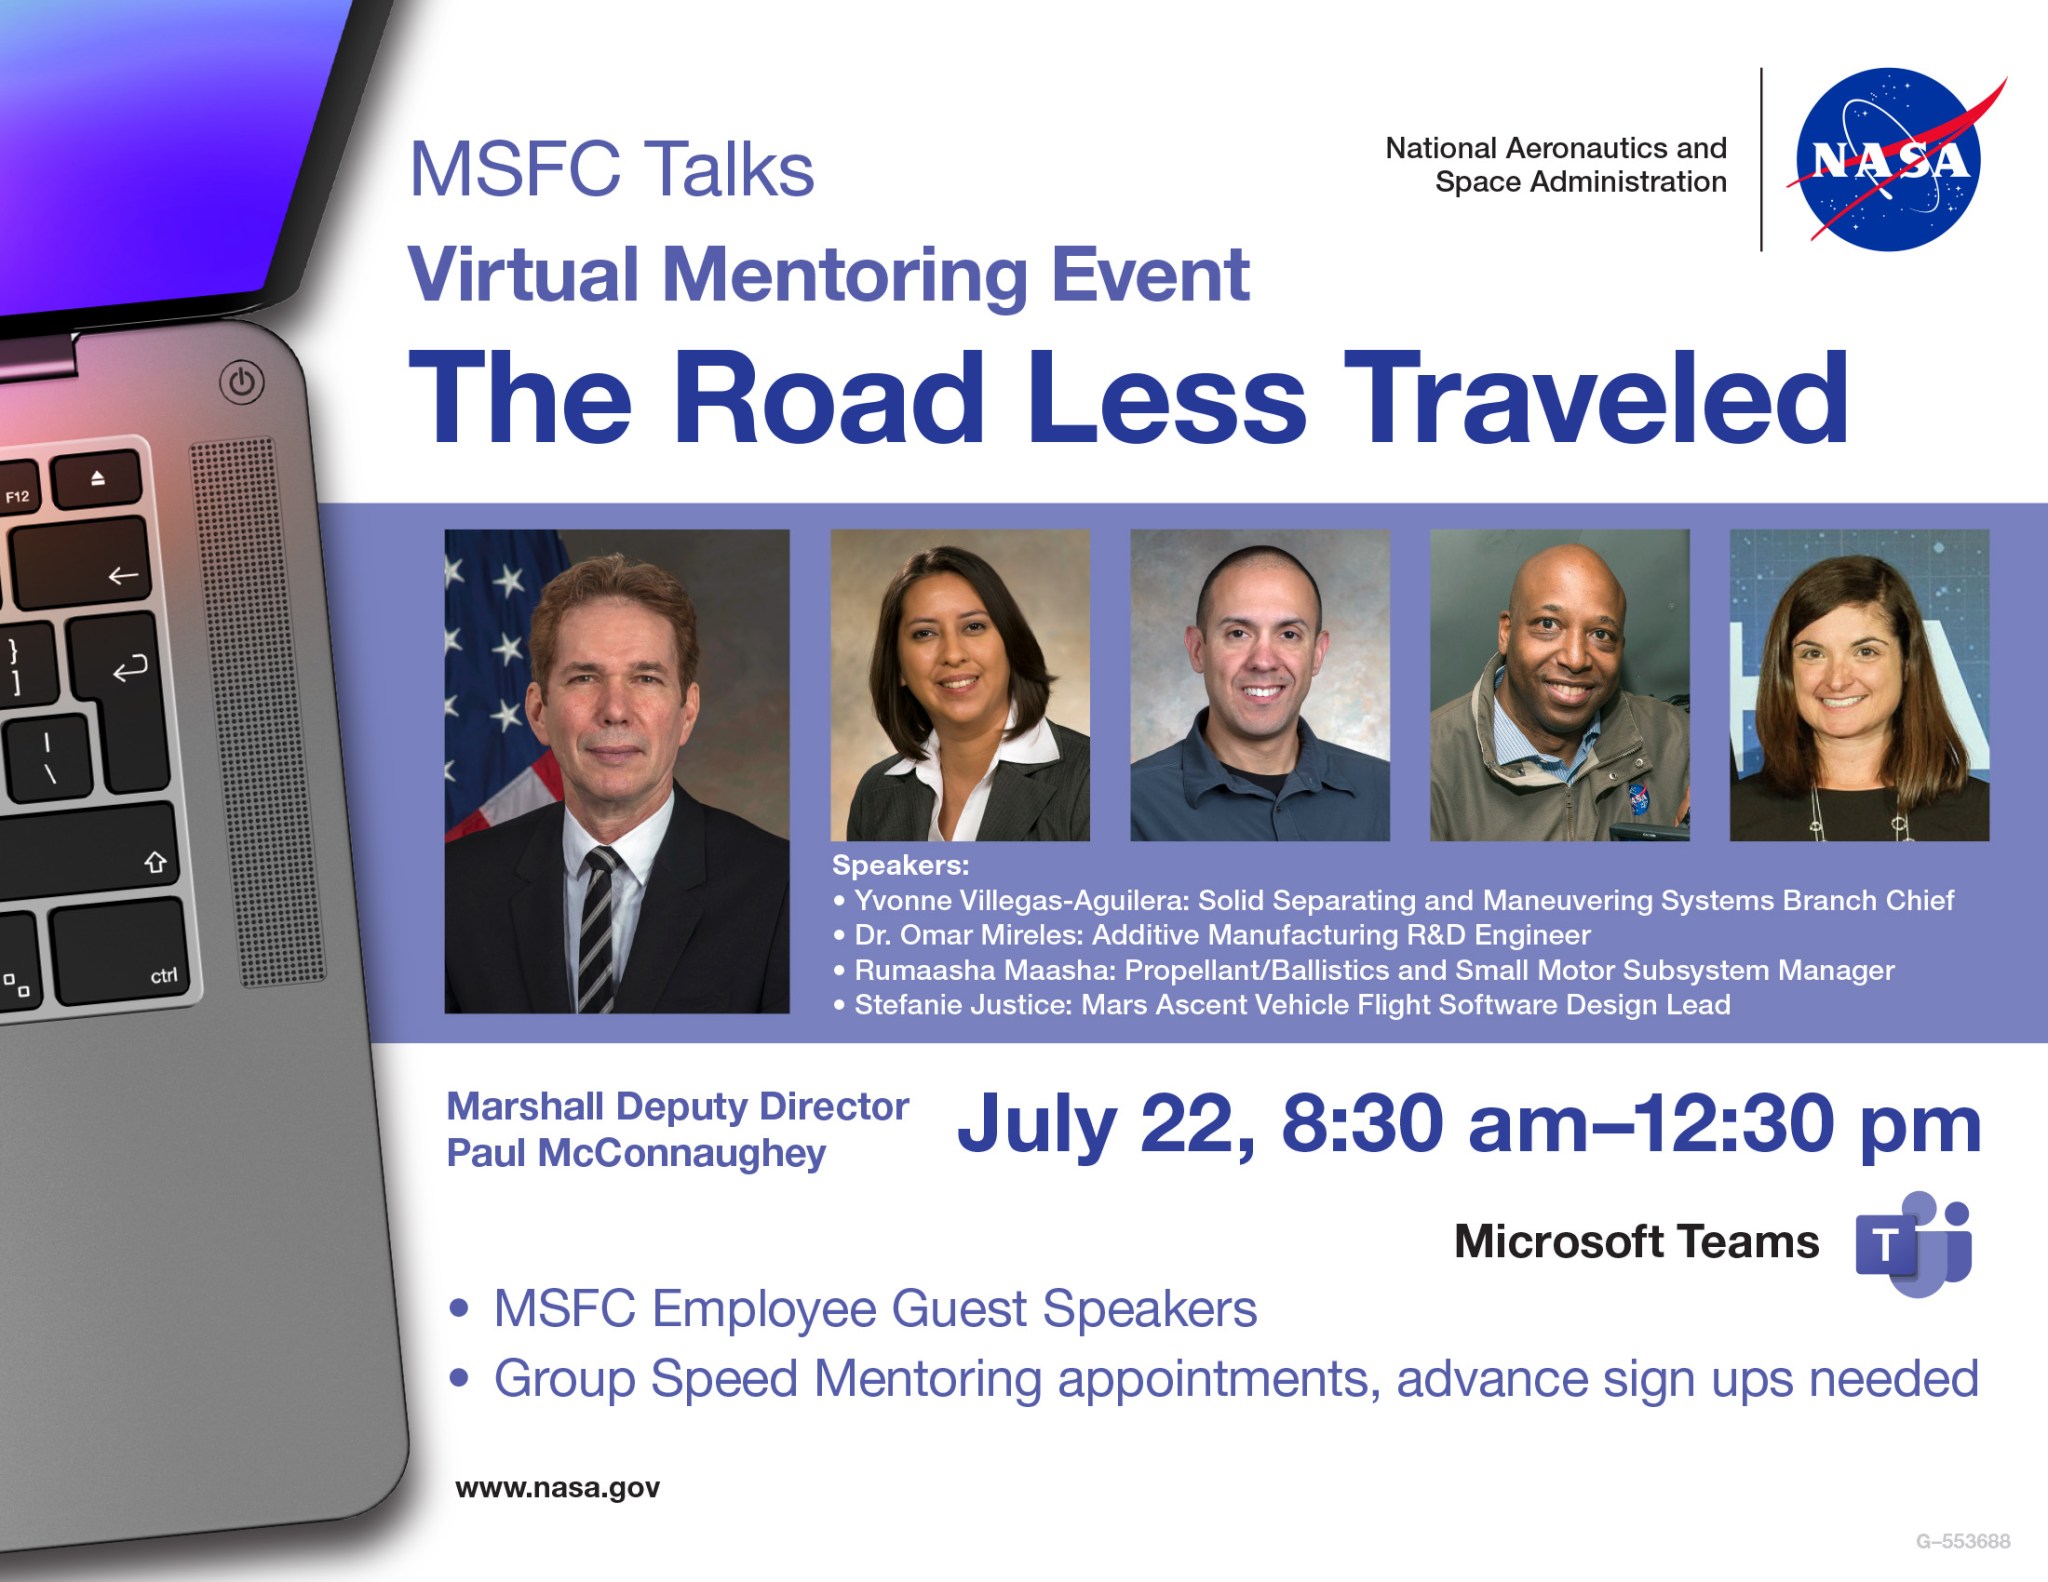 MSFC Talks Virtual Mentoring Event: The Road Less Traveled graphic.